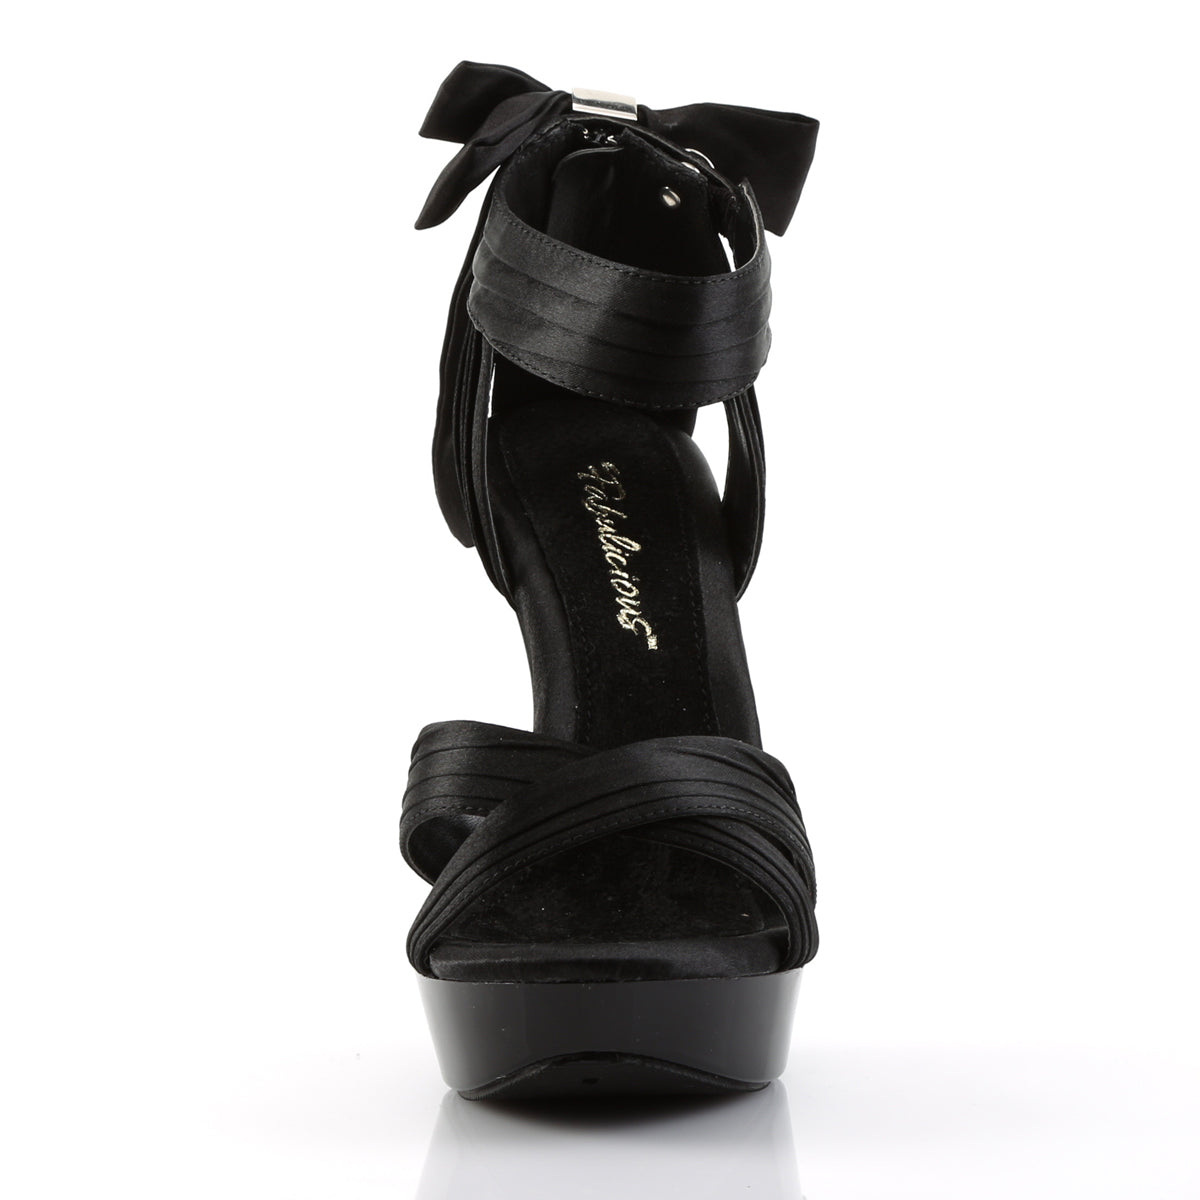 Fabulicious Womens Sandals COCKTAIL-568 Blk Satin/Blk